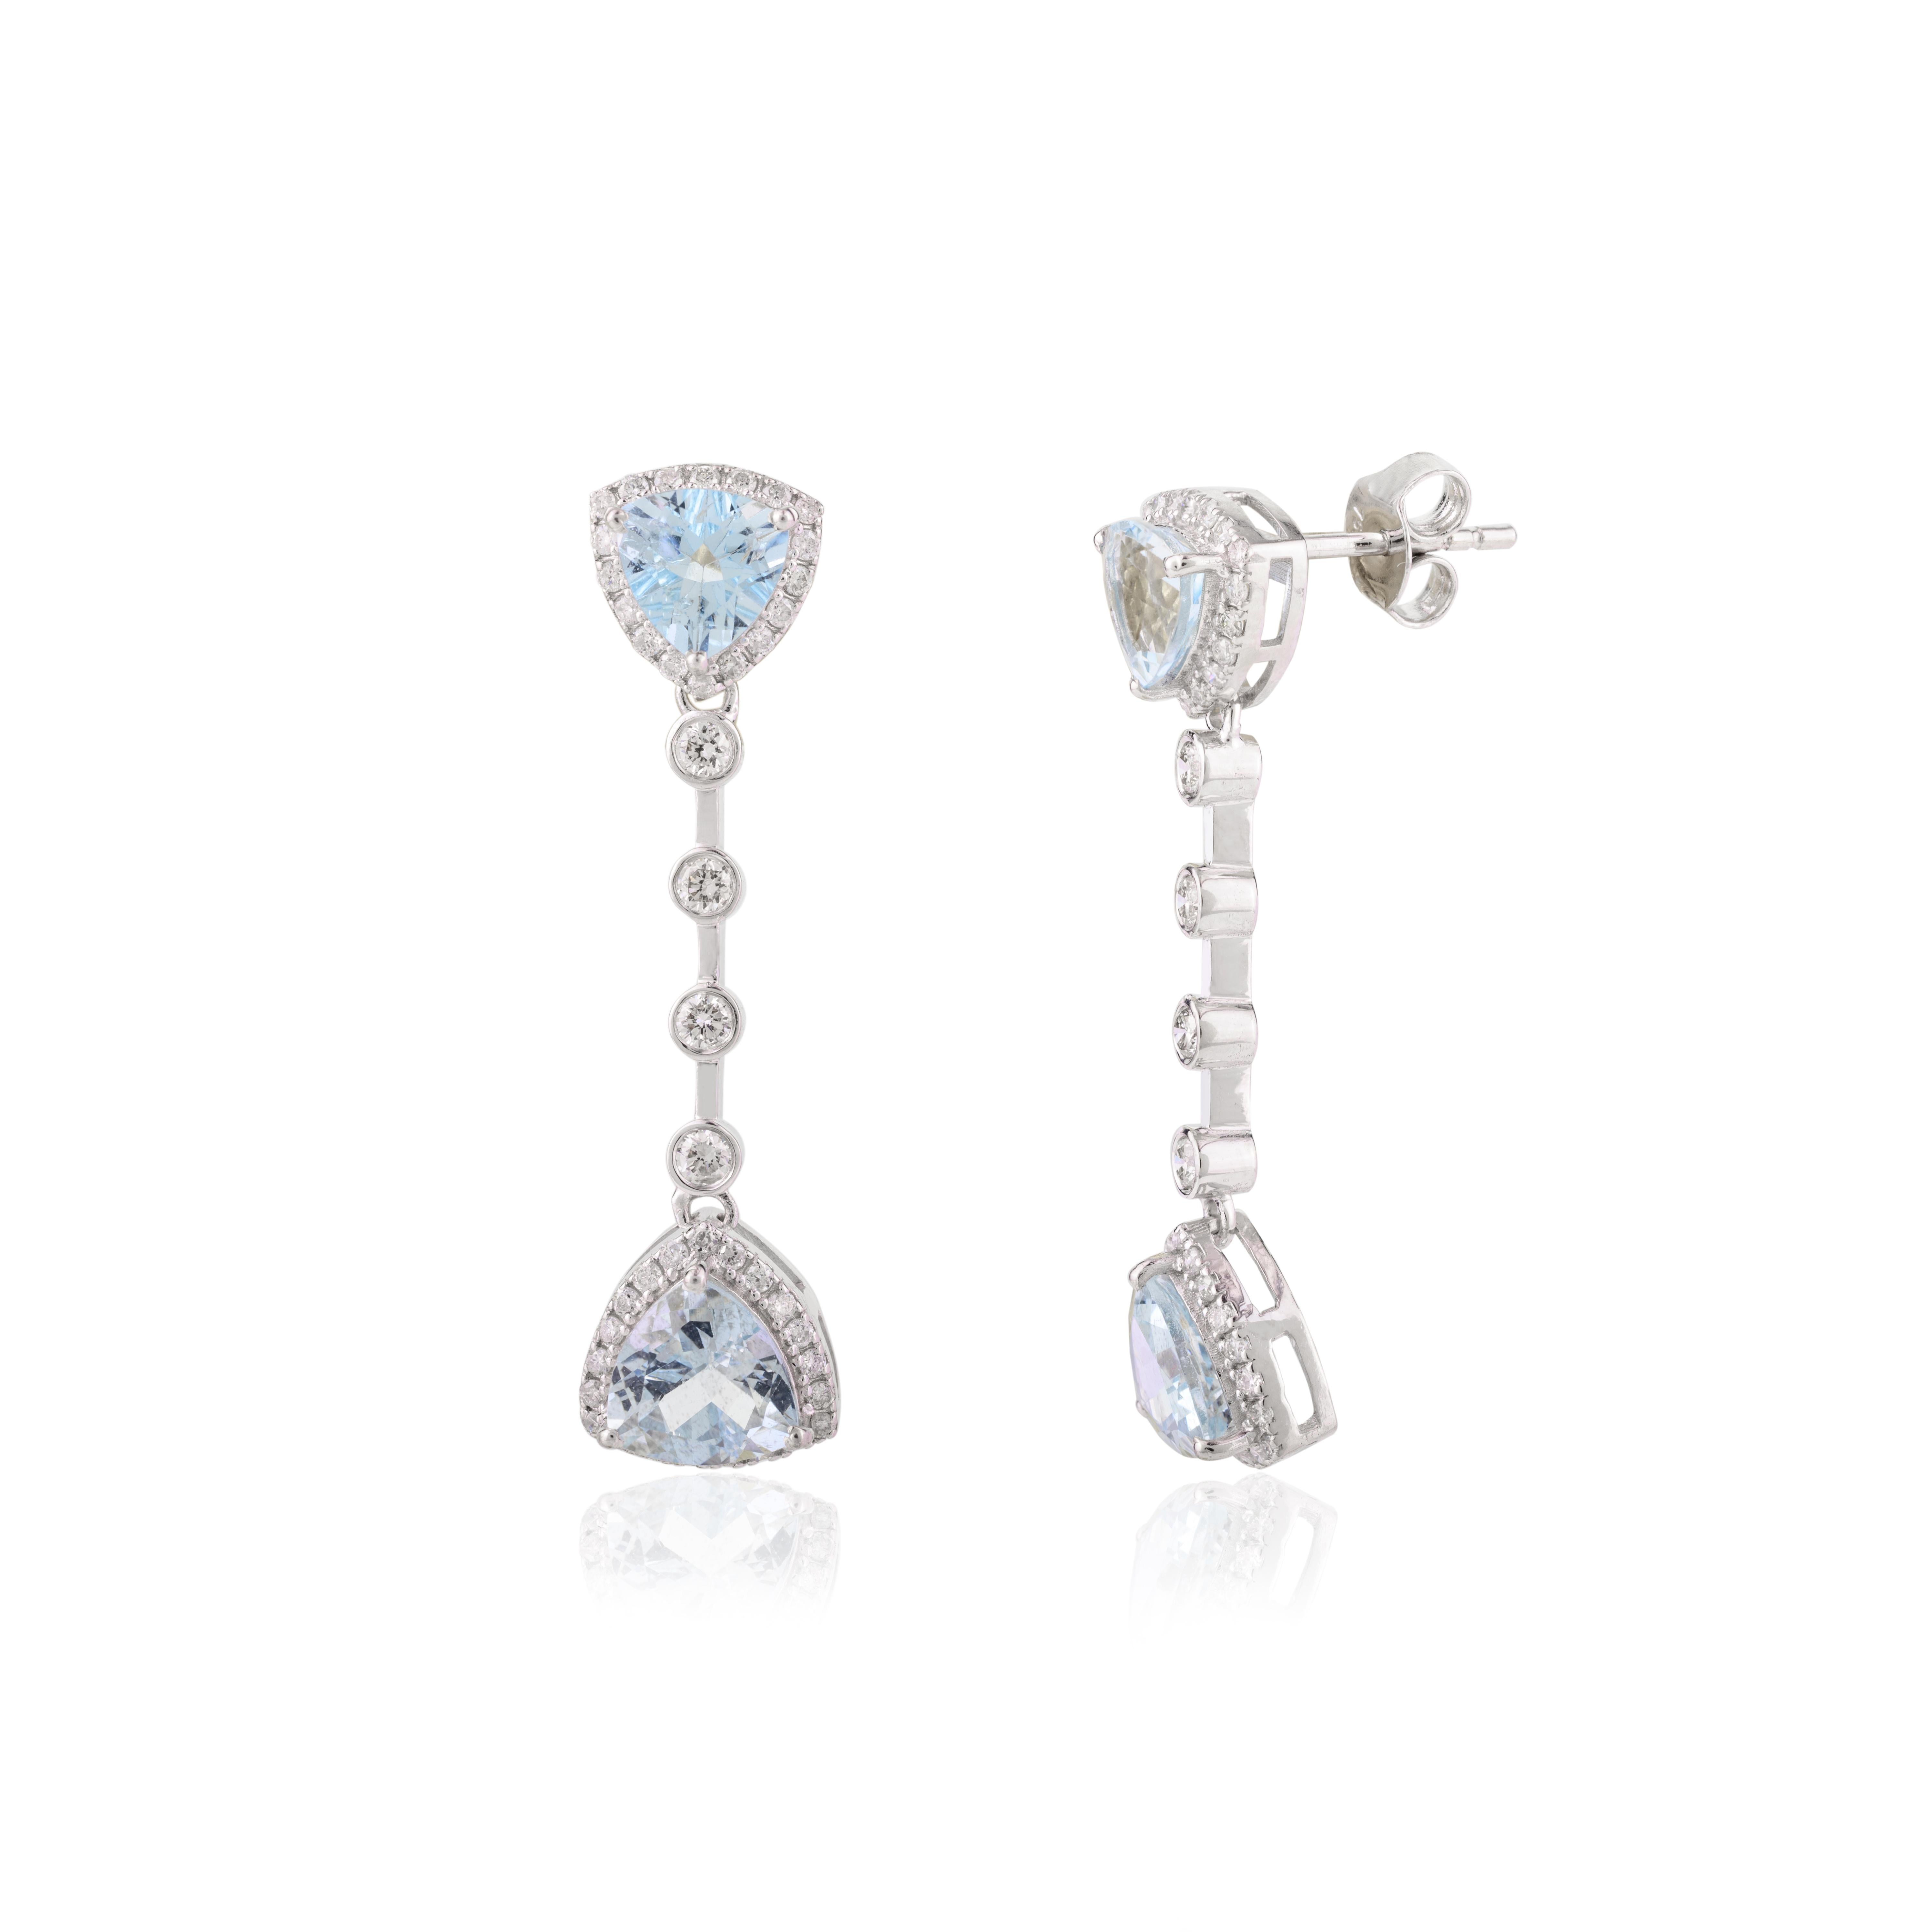 Designer 3.26 CTW Trillion Aquamarine Diamond Drop Earrings in 18k White Gold In New Condition For Sale In Houston, TX